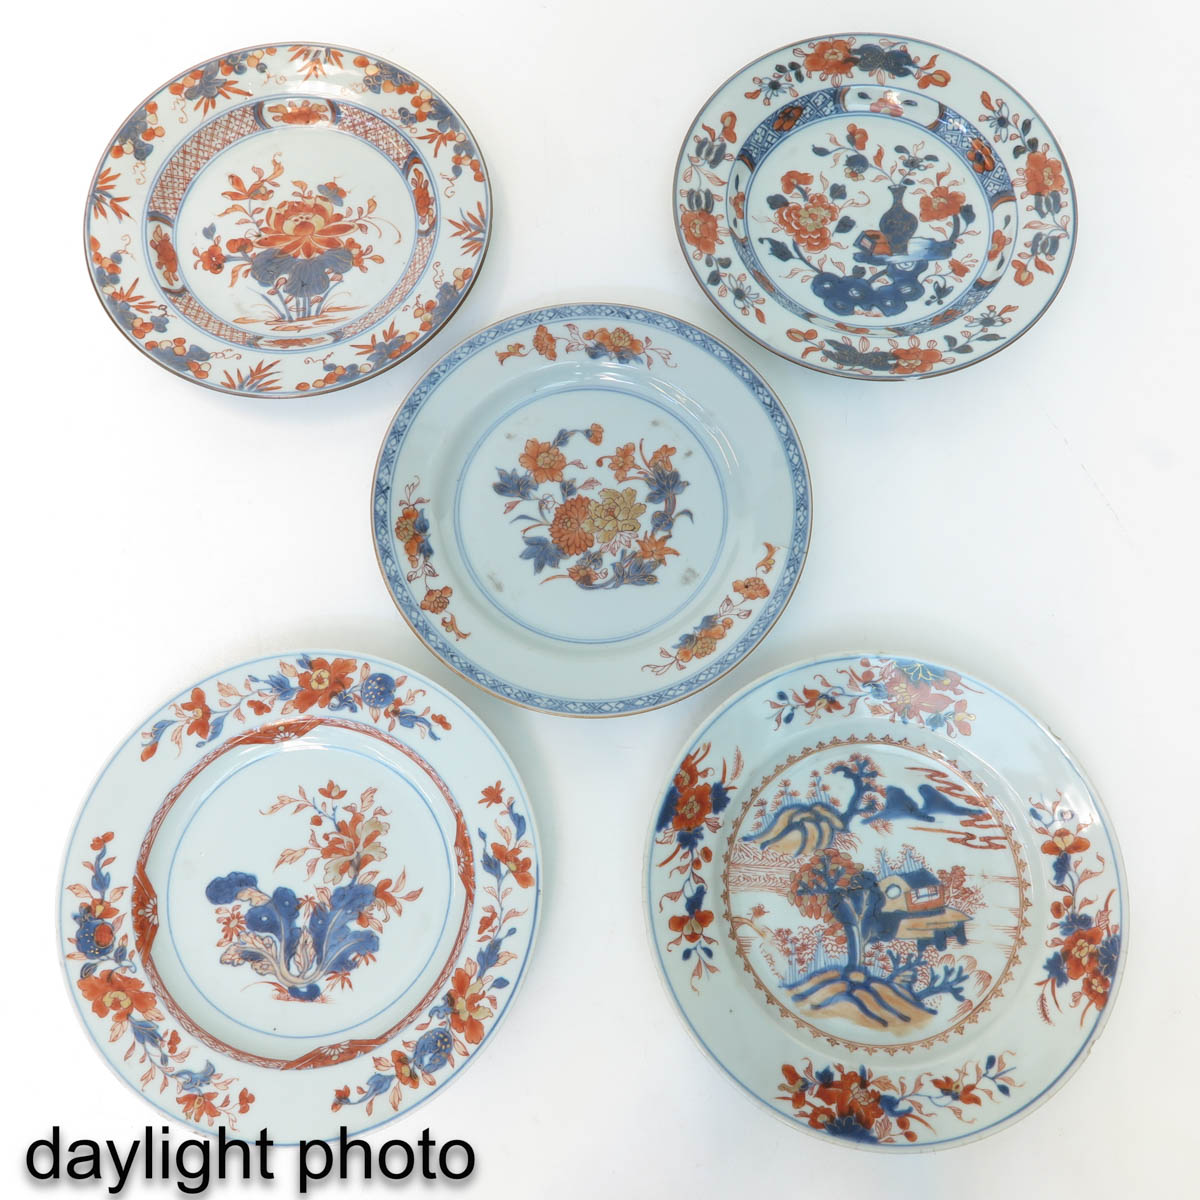 A Collection of 5 Imari Plates - Image 9 of 10